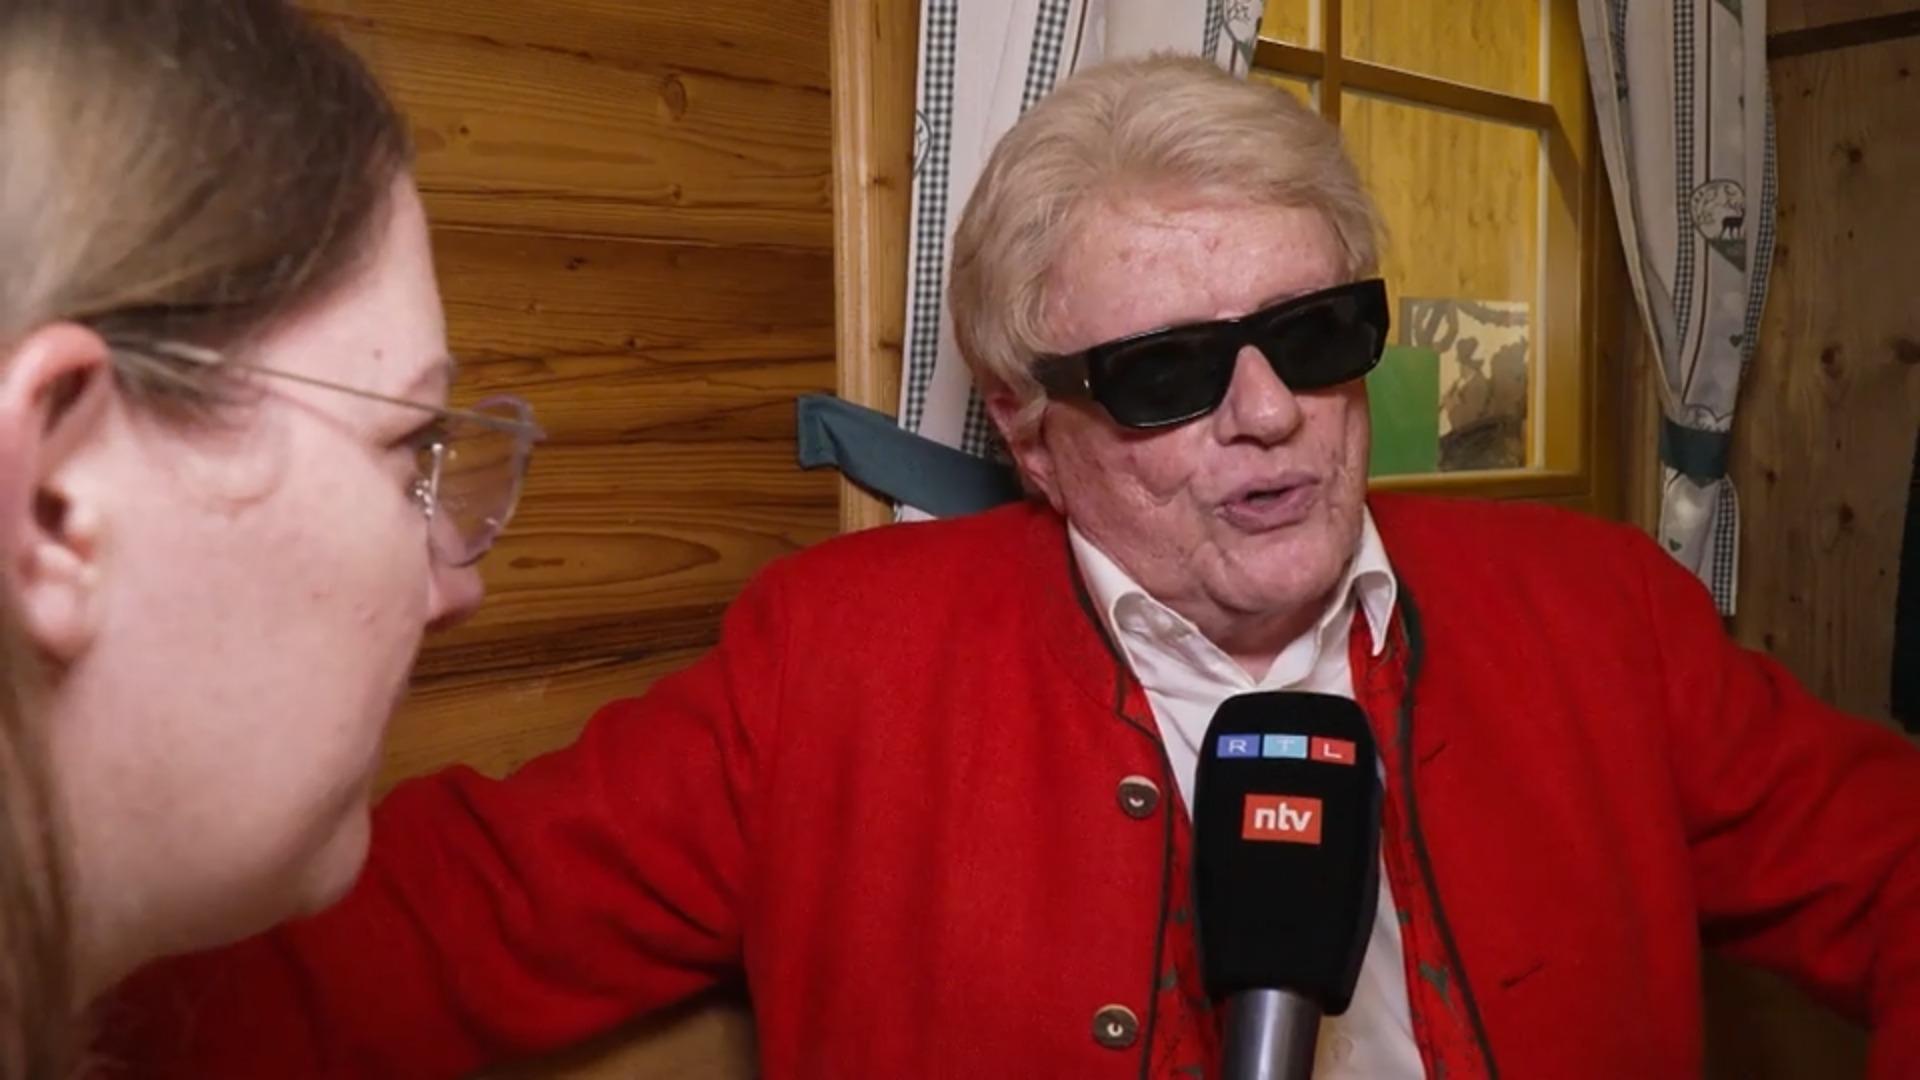 Heino: “Don’t accept the gender!" No insight after Shitstorm!